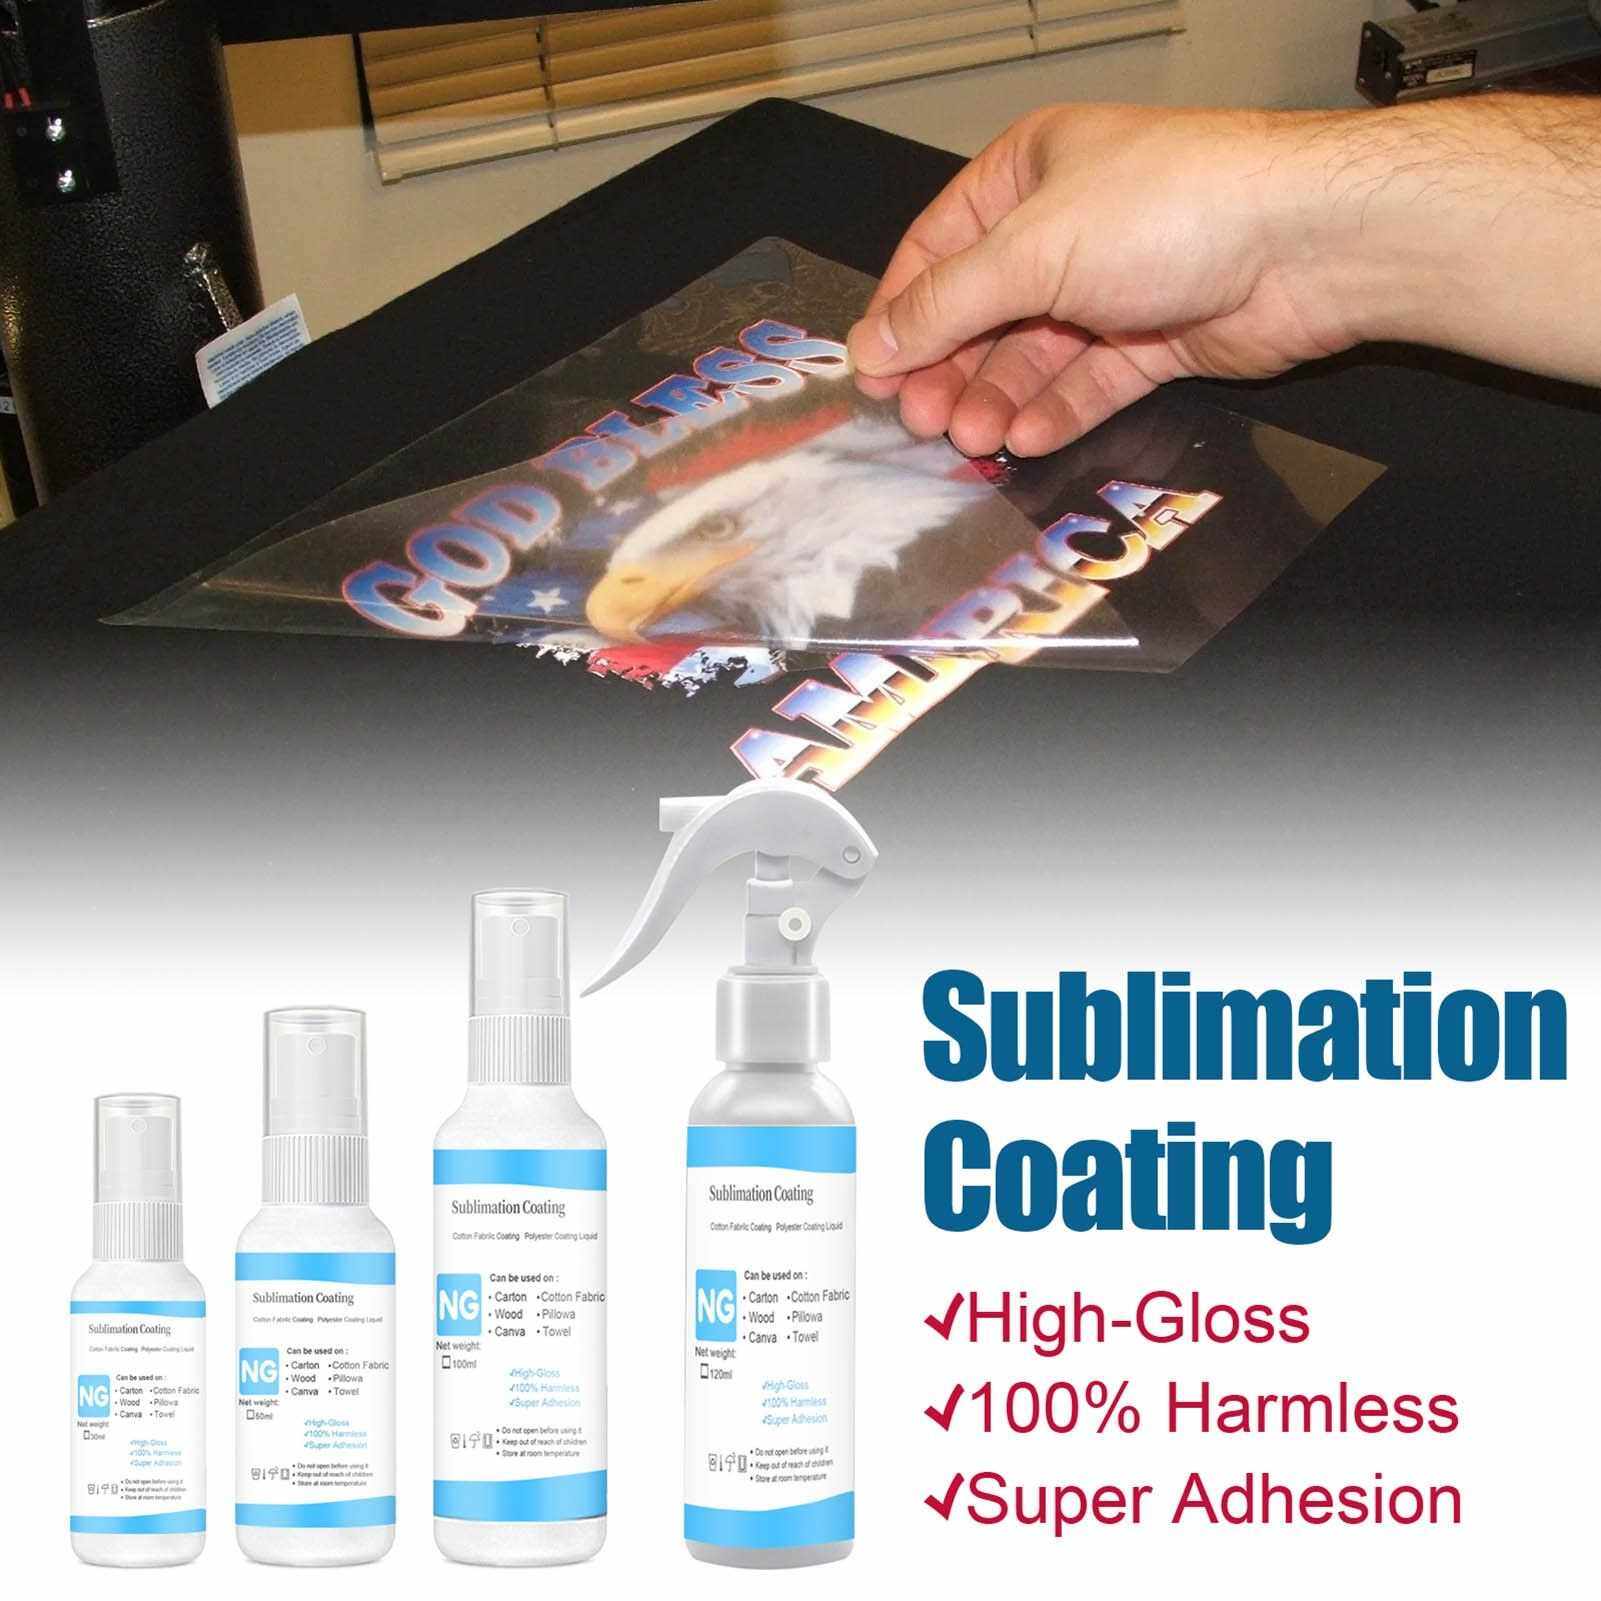 BEST SELLER 120ml Sublimation Coating Spray Fabric Coating Polyester Coating Liquid Quick-drying High-gloss Harmless (Type 4)